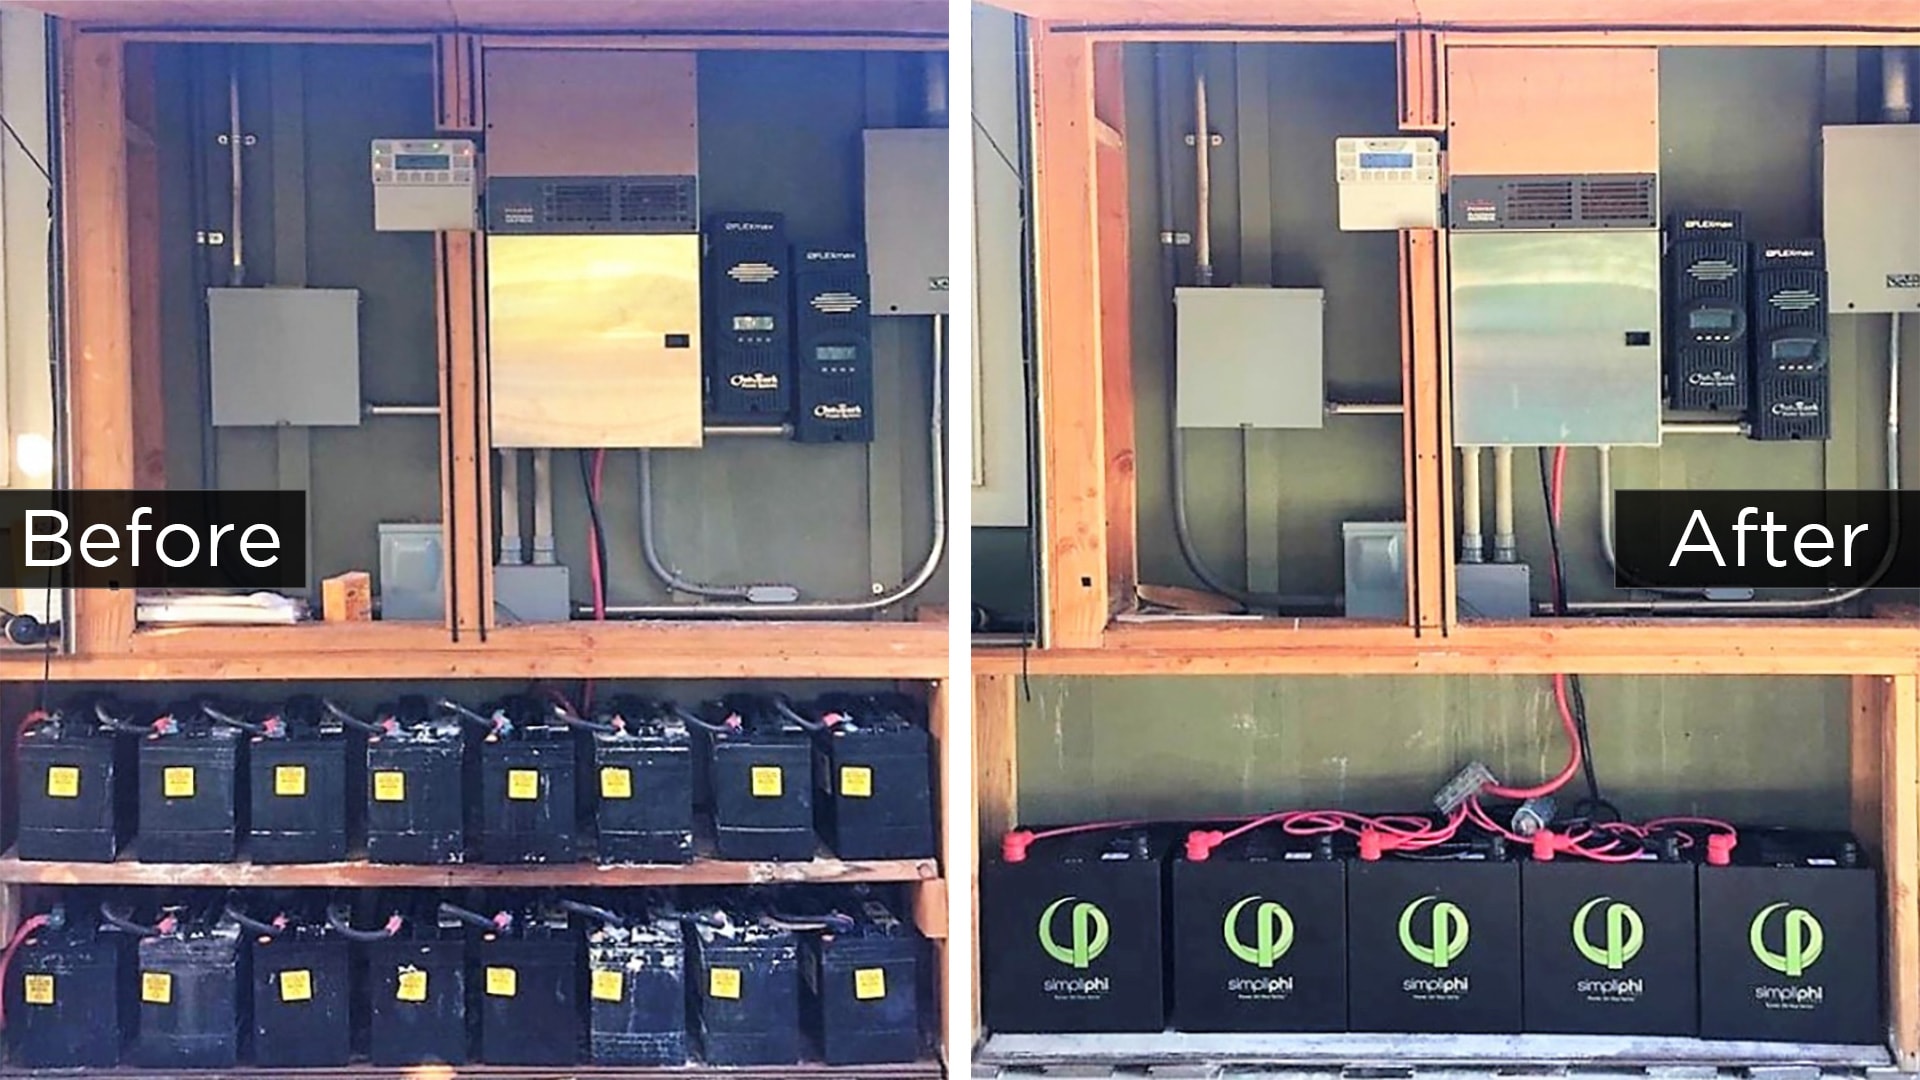 https://simpliphipower.com/wp-content/uploads/2019/11/hawaii-cbc-install-before-after-lead-acid-replacement-batteries-phi-3-5-simpliphi-power-text-white-divider-1920-1080.jpg